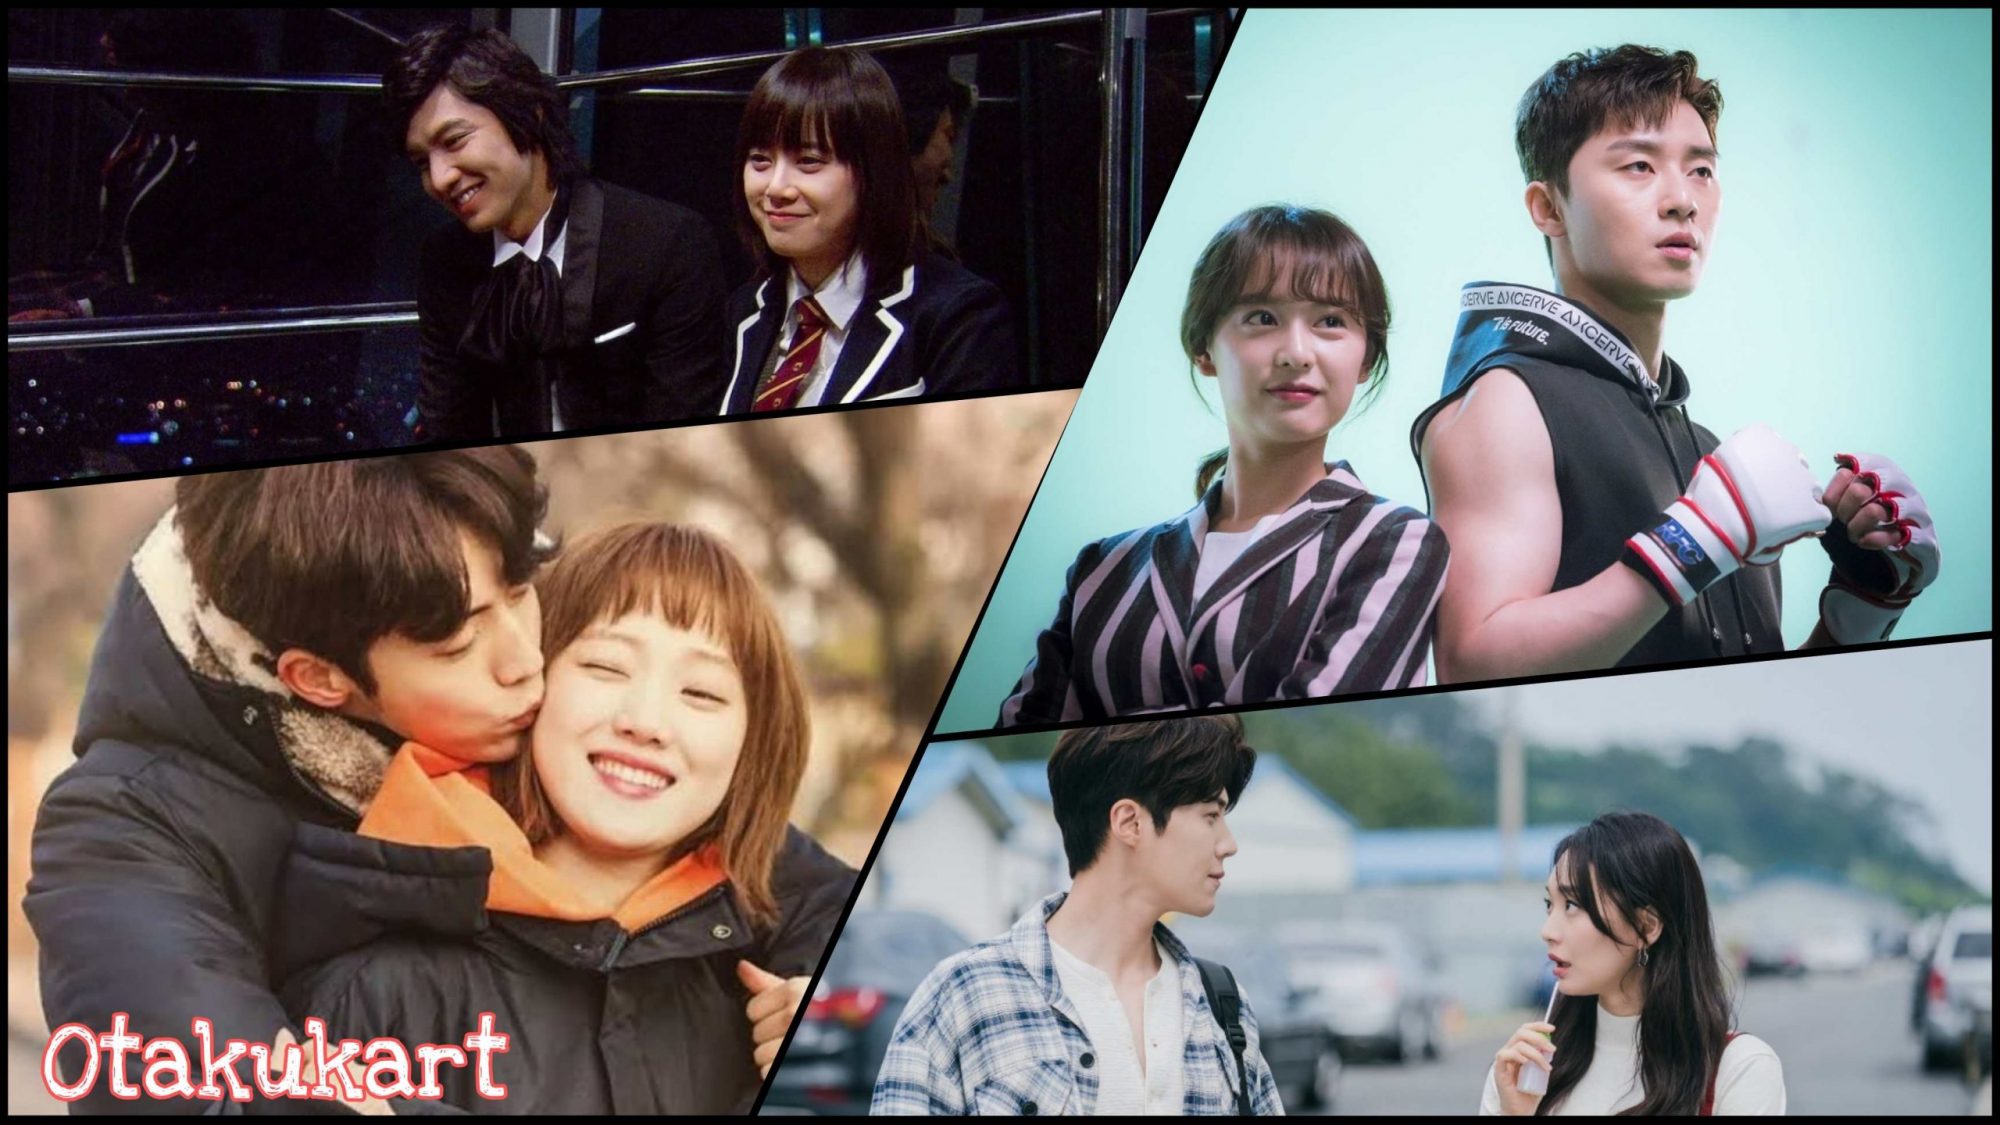 Top Eight K-dramas to Get You Out of Your Slump